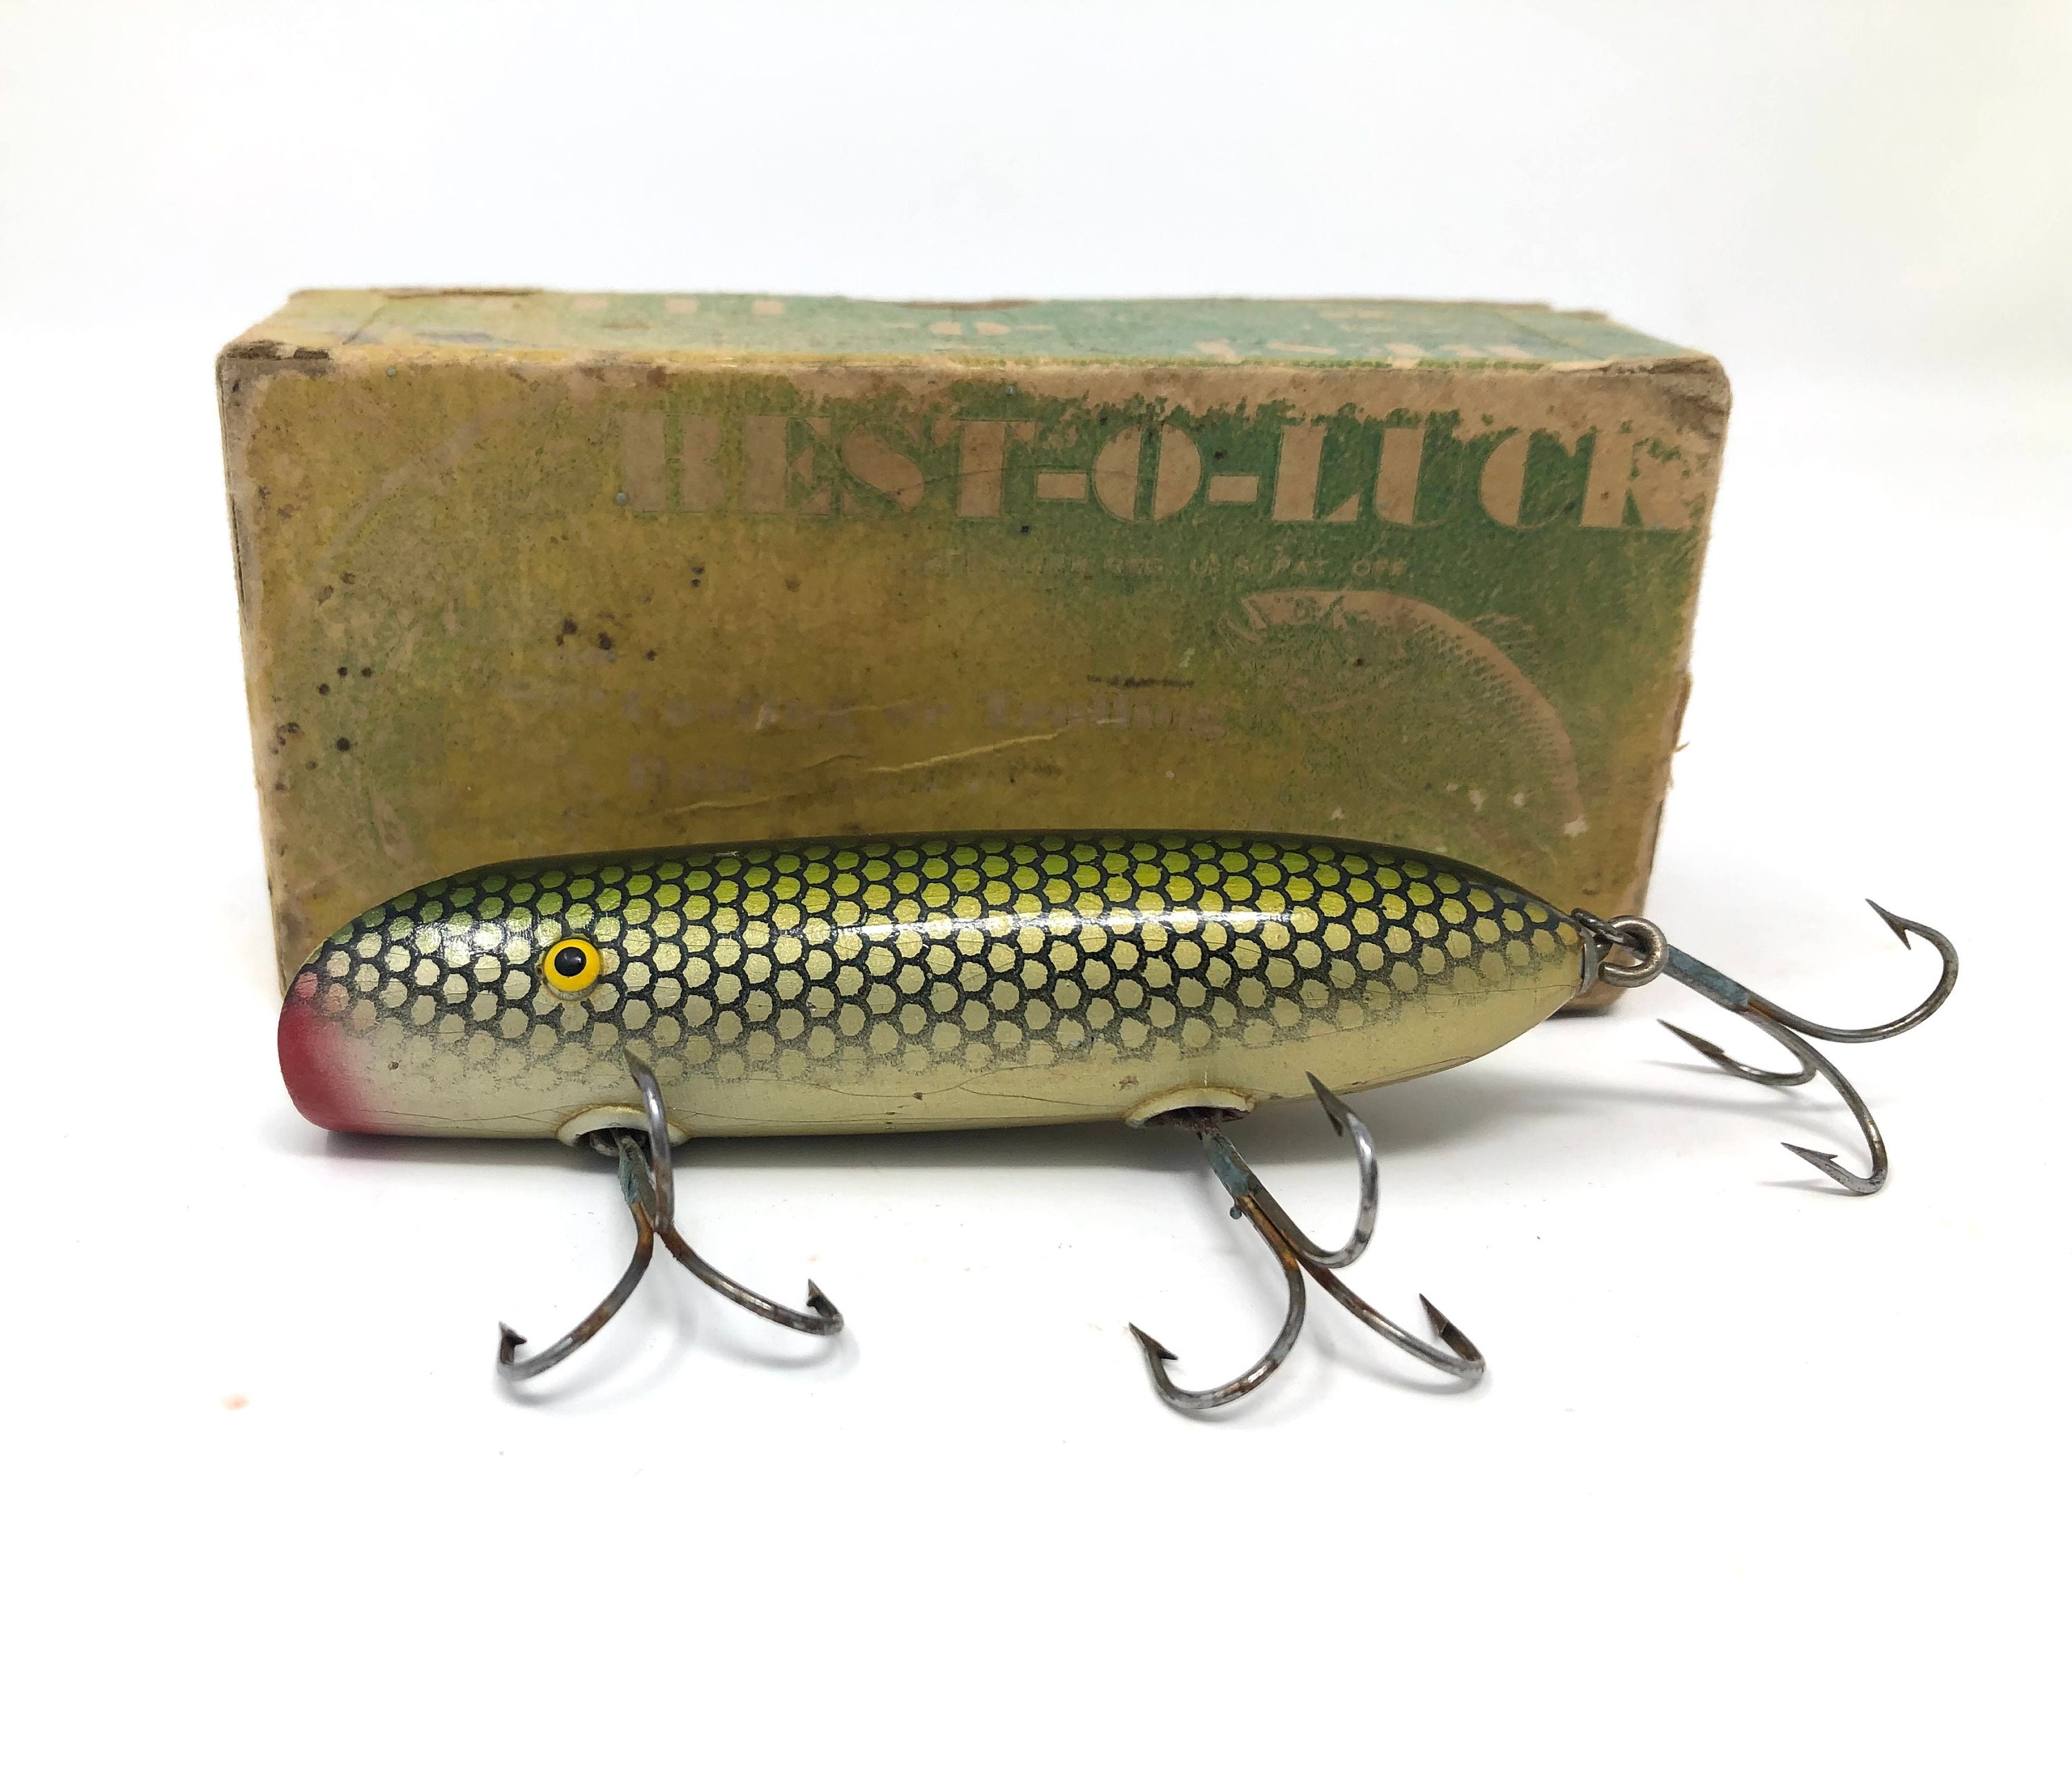 Vintage South Bend Best-o-luck Bass O Reno Lure With Box / Antique